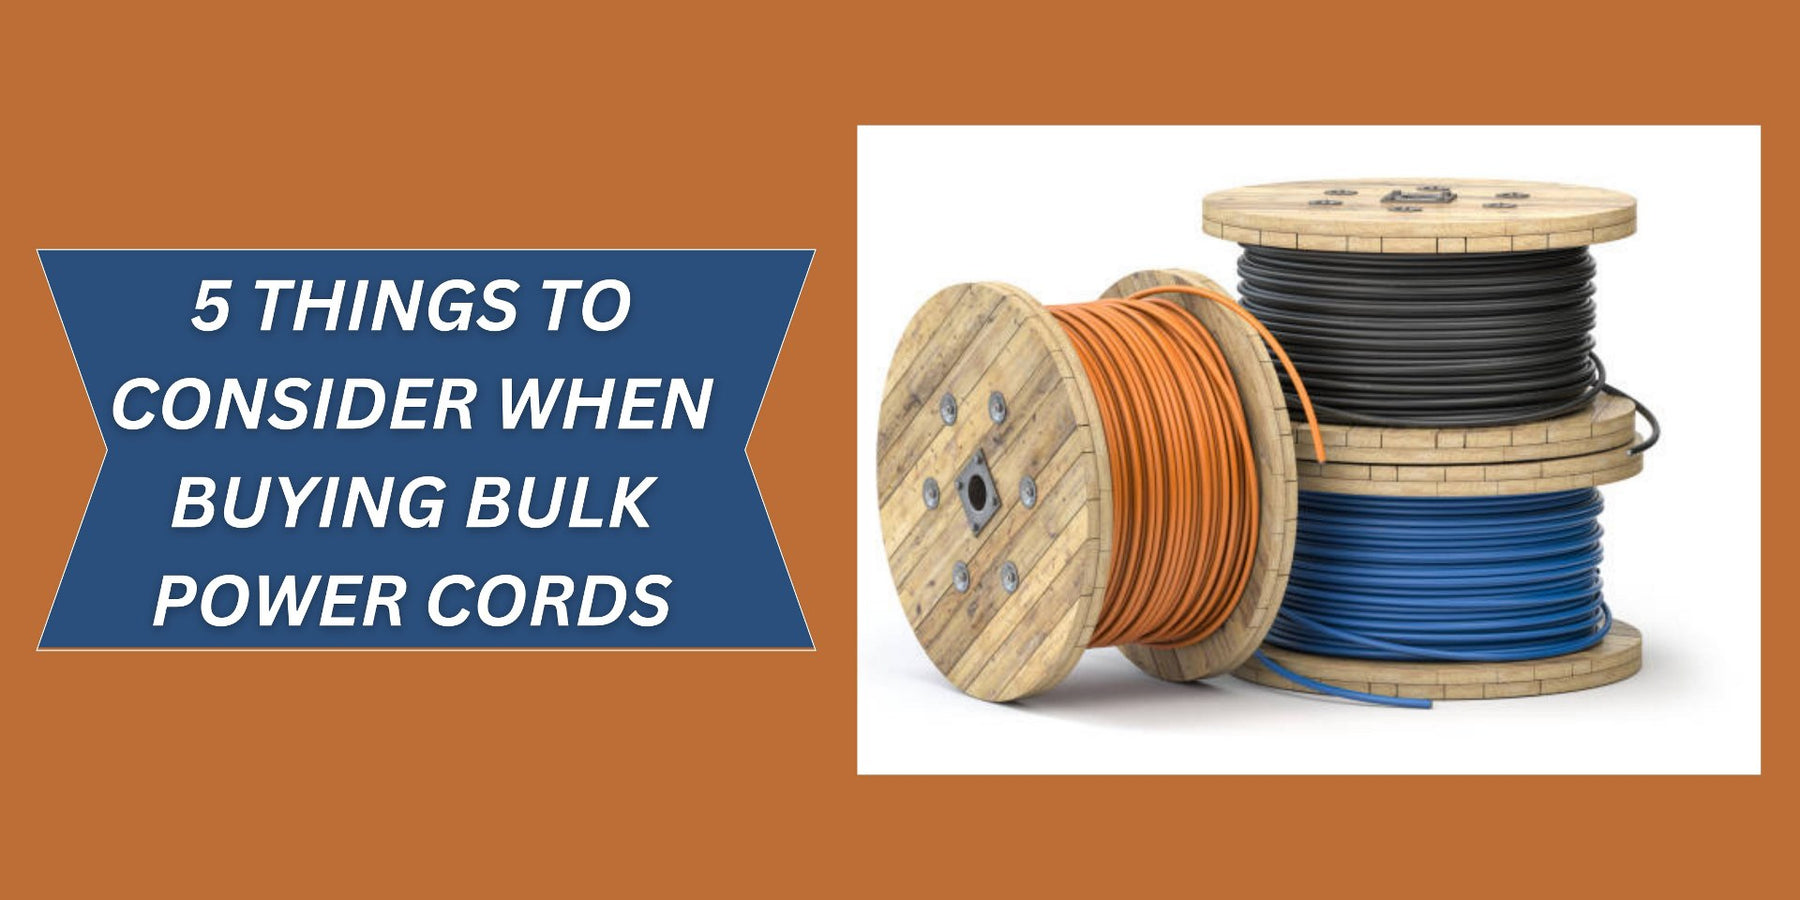 5 Things to Consider When Buying Bulk Power Cords